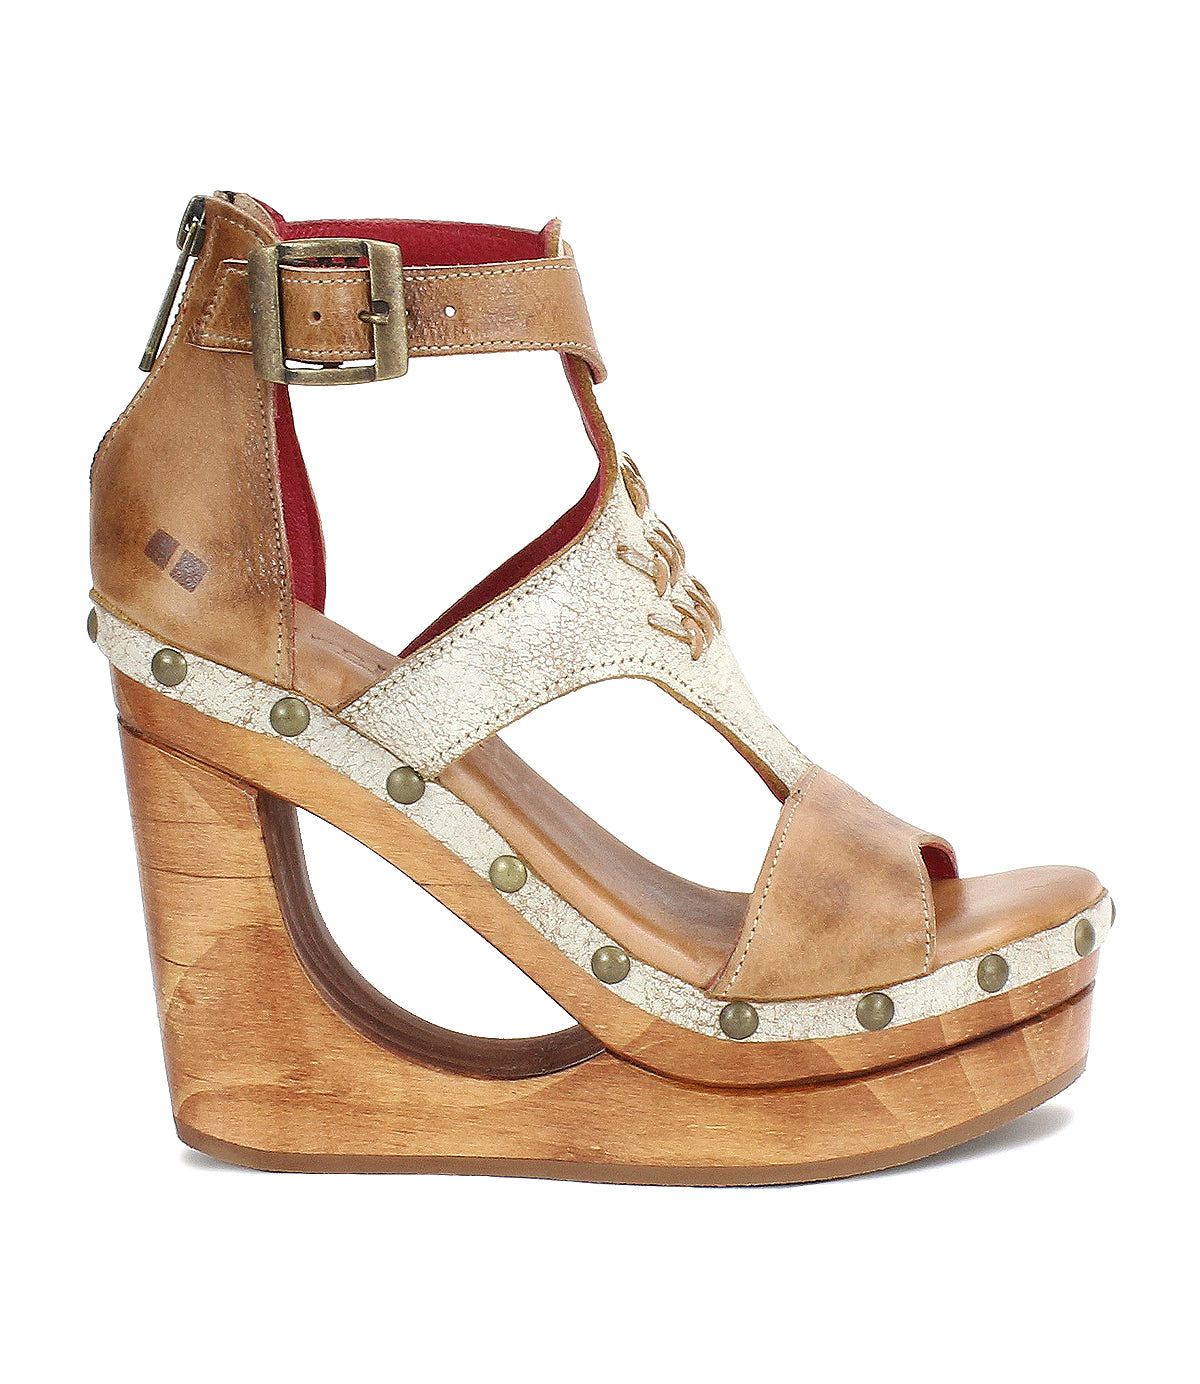 A Millennial sandal by Bed Stu with a wooden wedge and t-strap design.